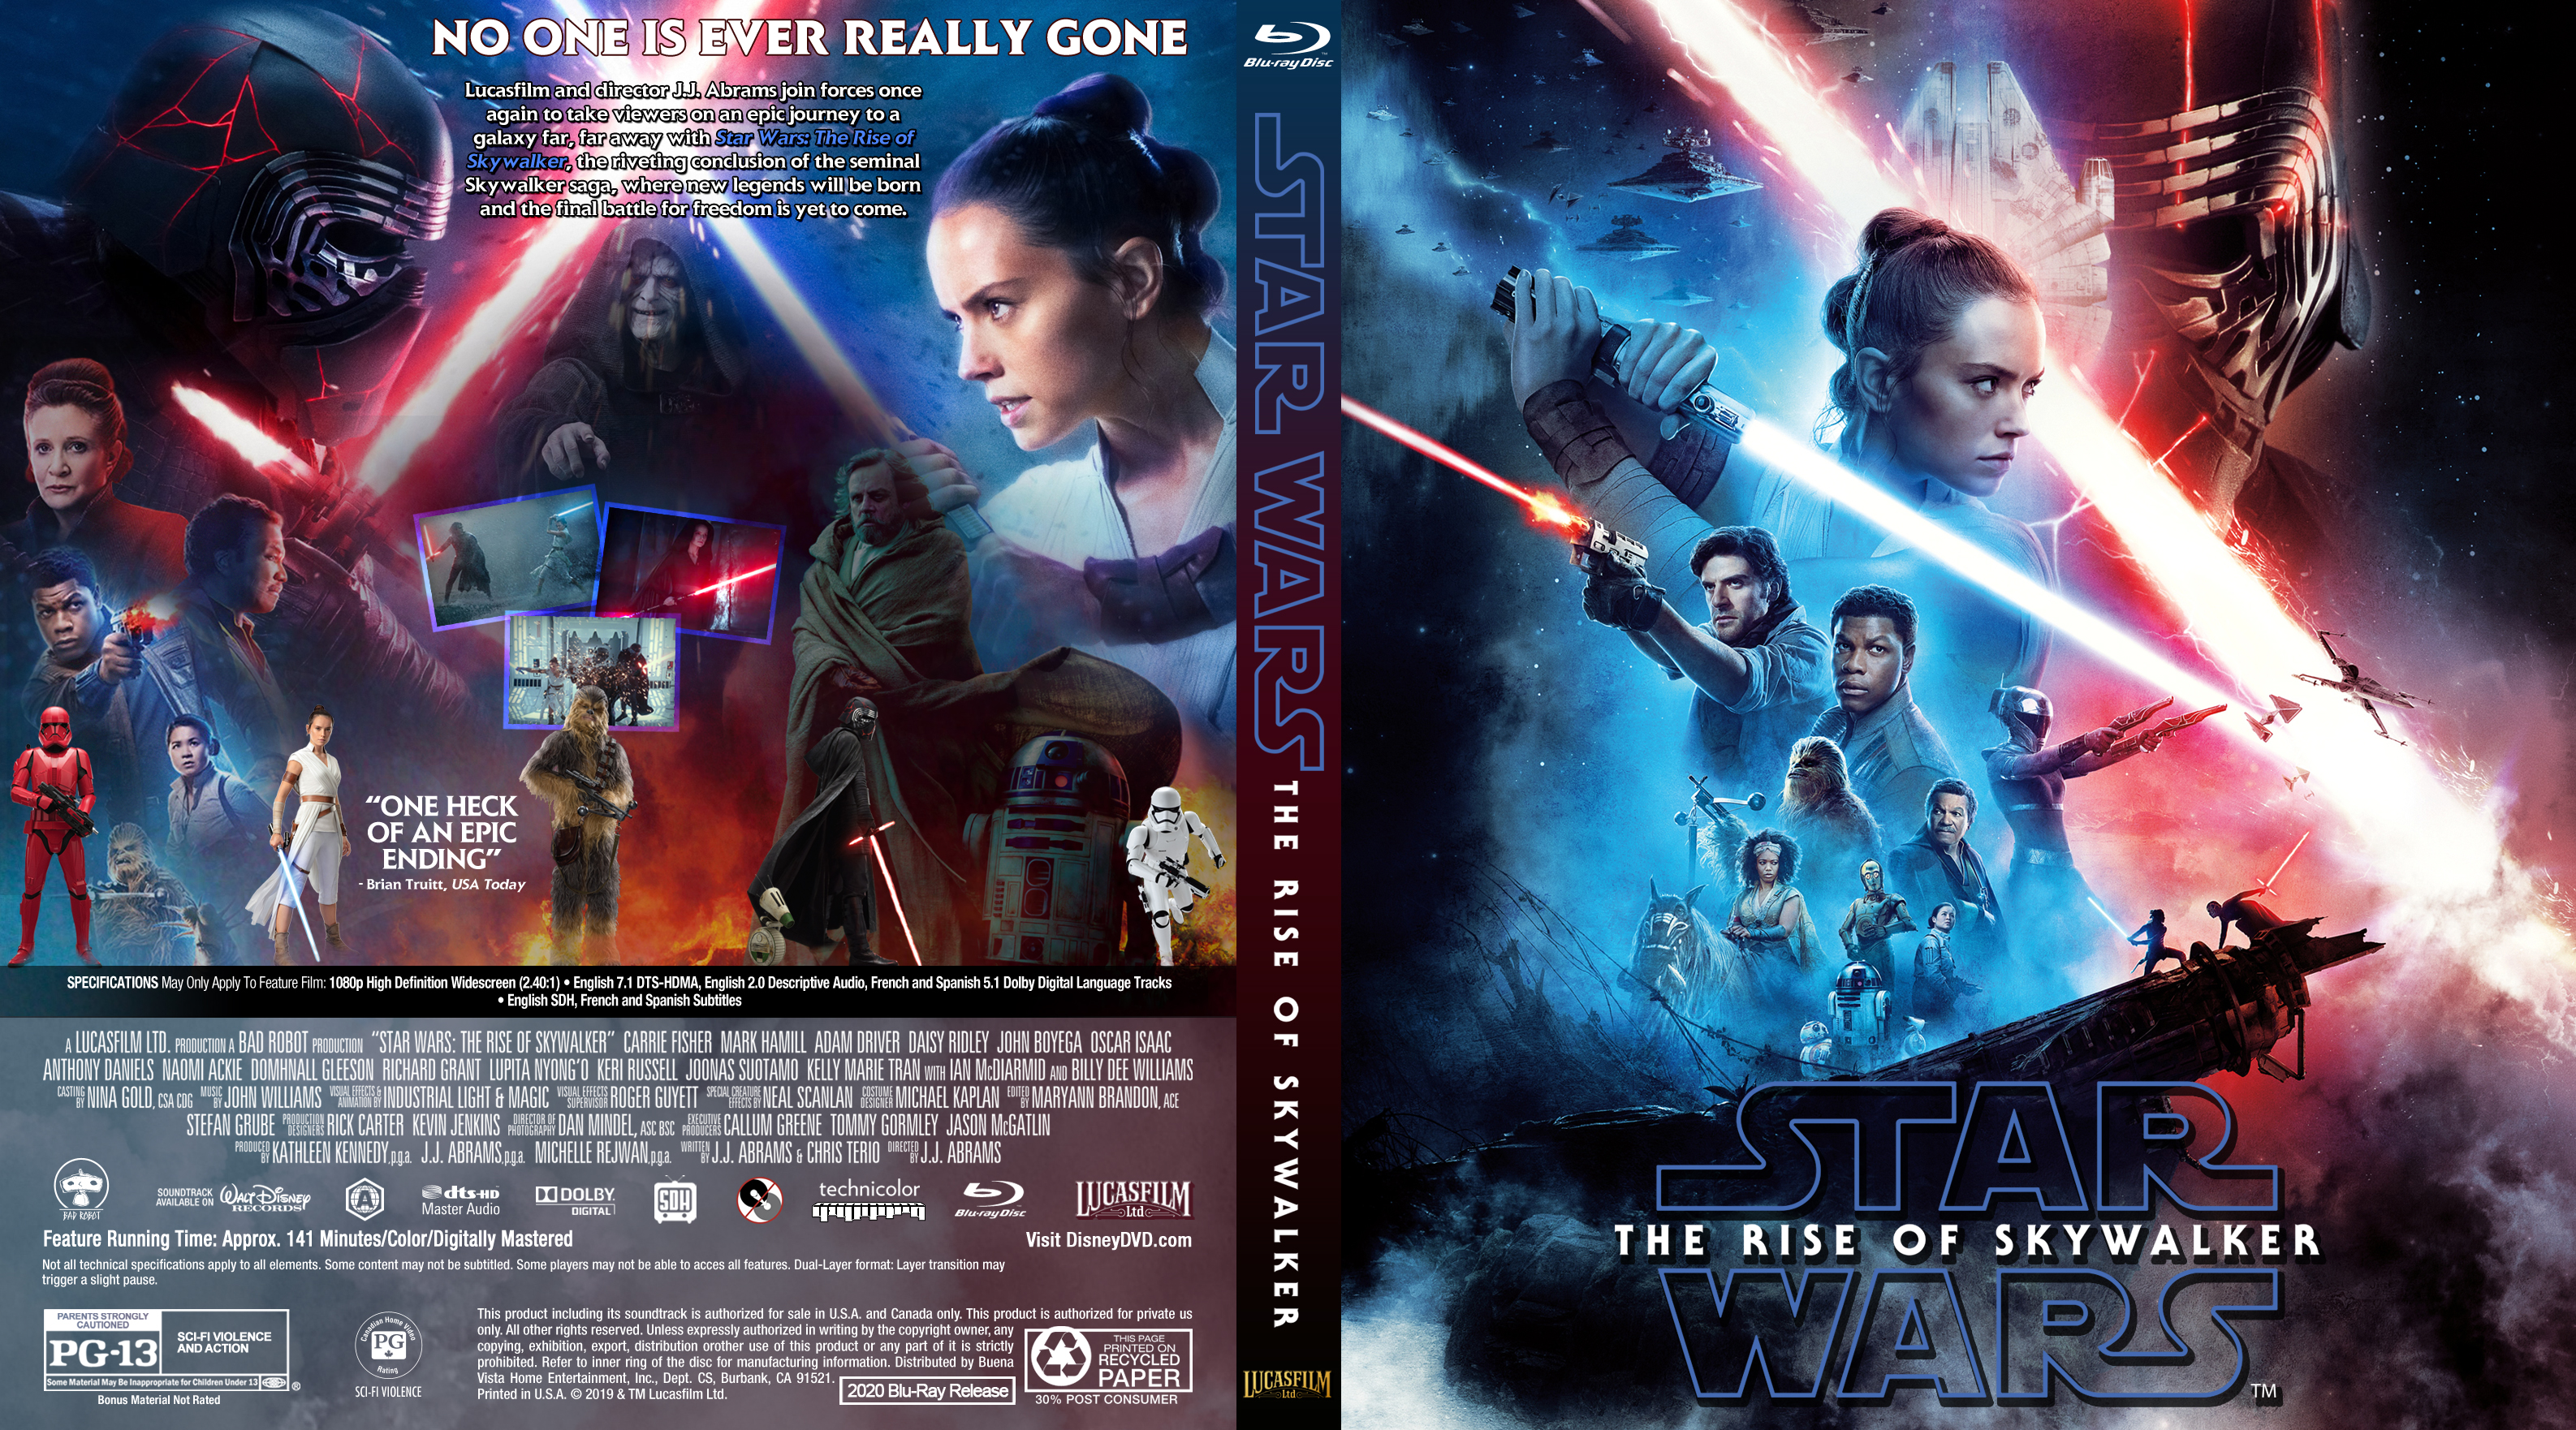 Star Wars Episode Ix The Rise Of Skywalker Bluray Cover Cover Addict Free Dvd Bluray Covers And Movie Posters